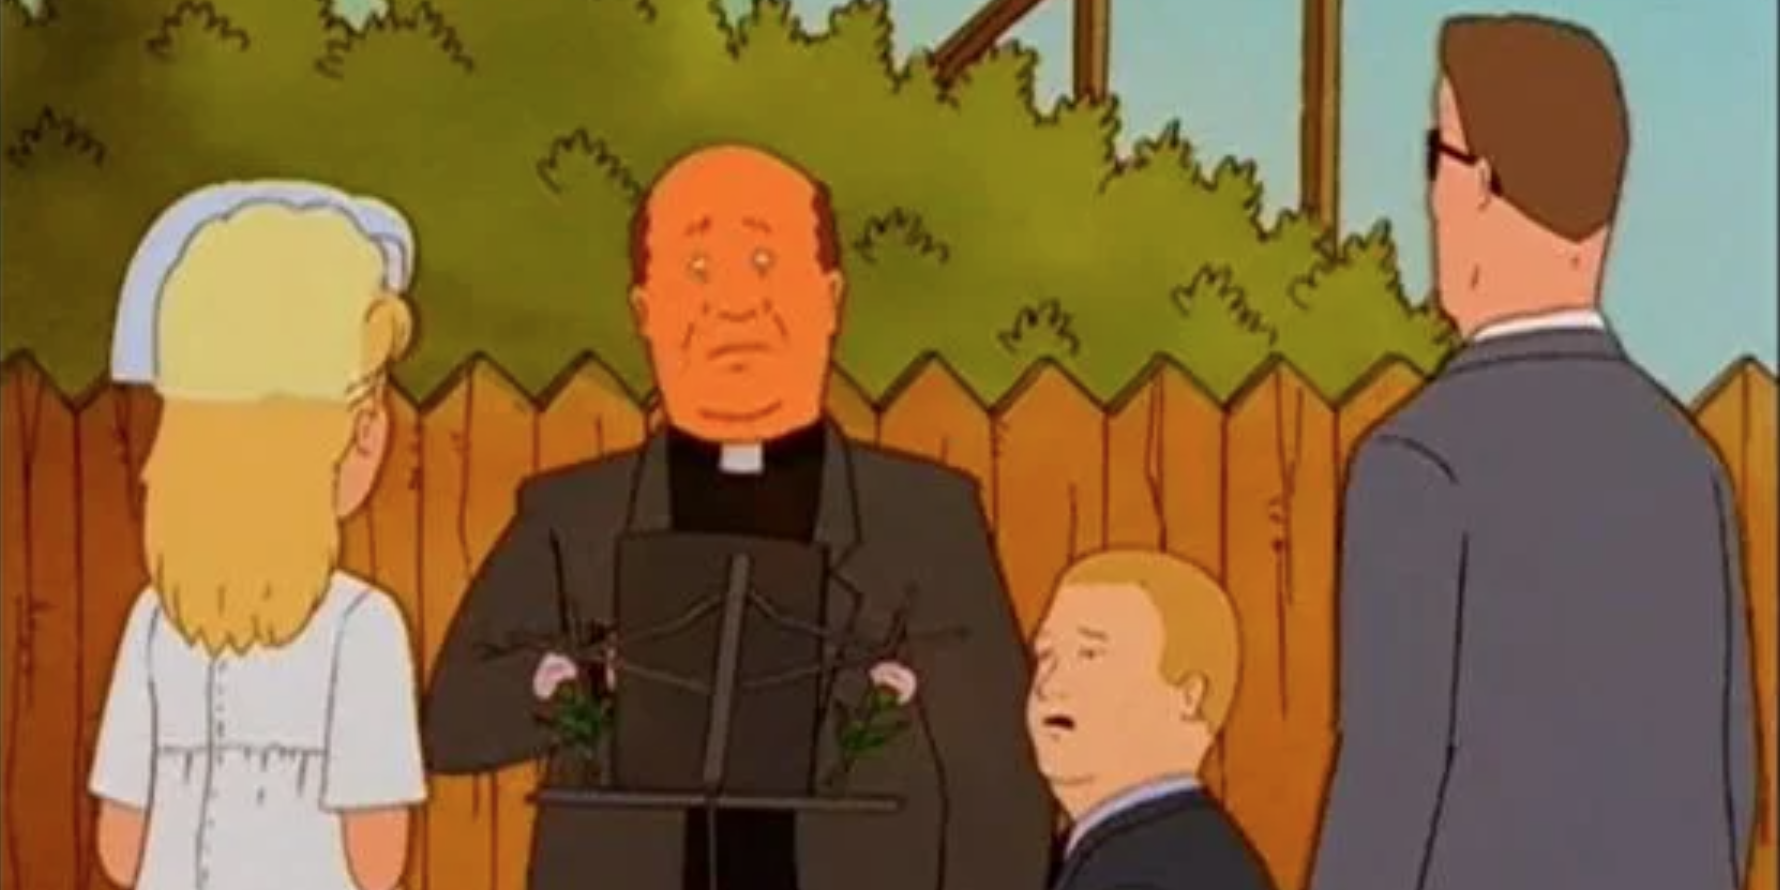 bobby and luanne's wedding in King of the Hill